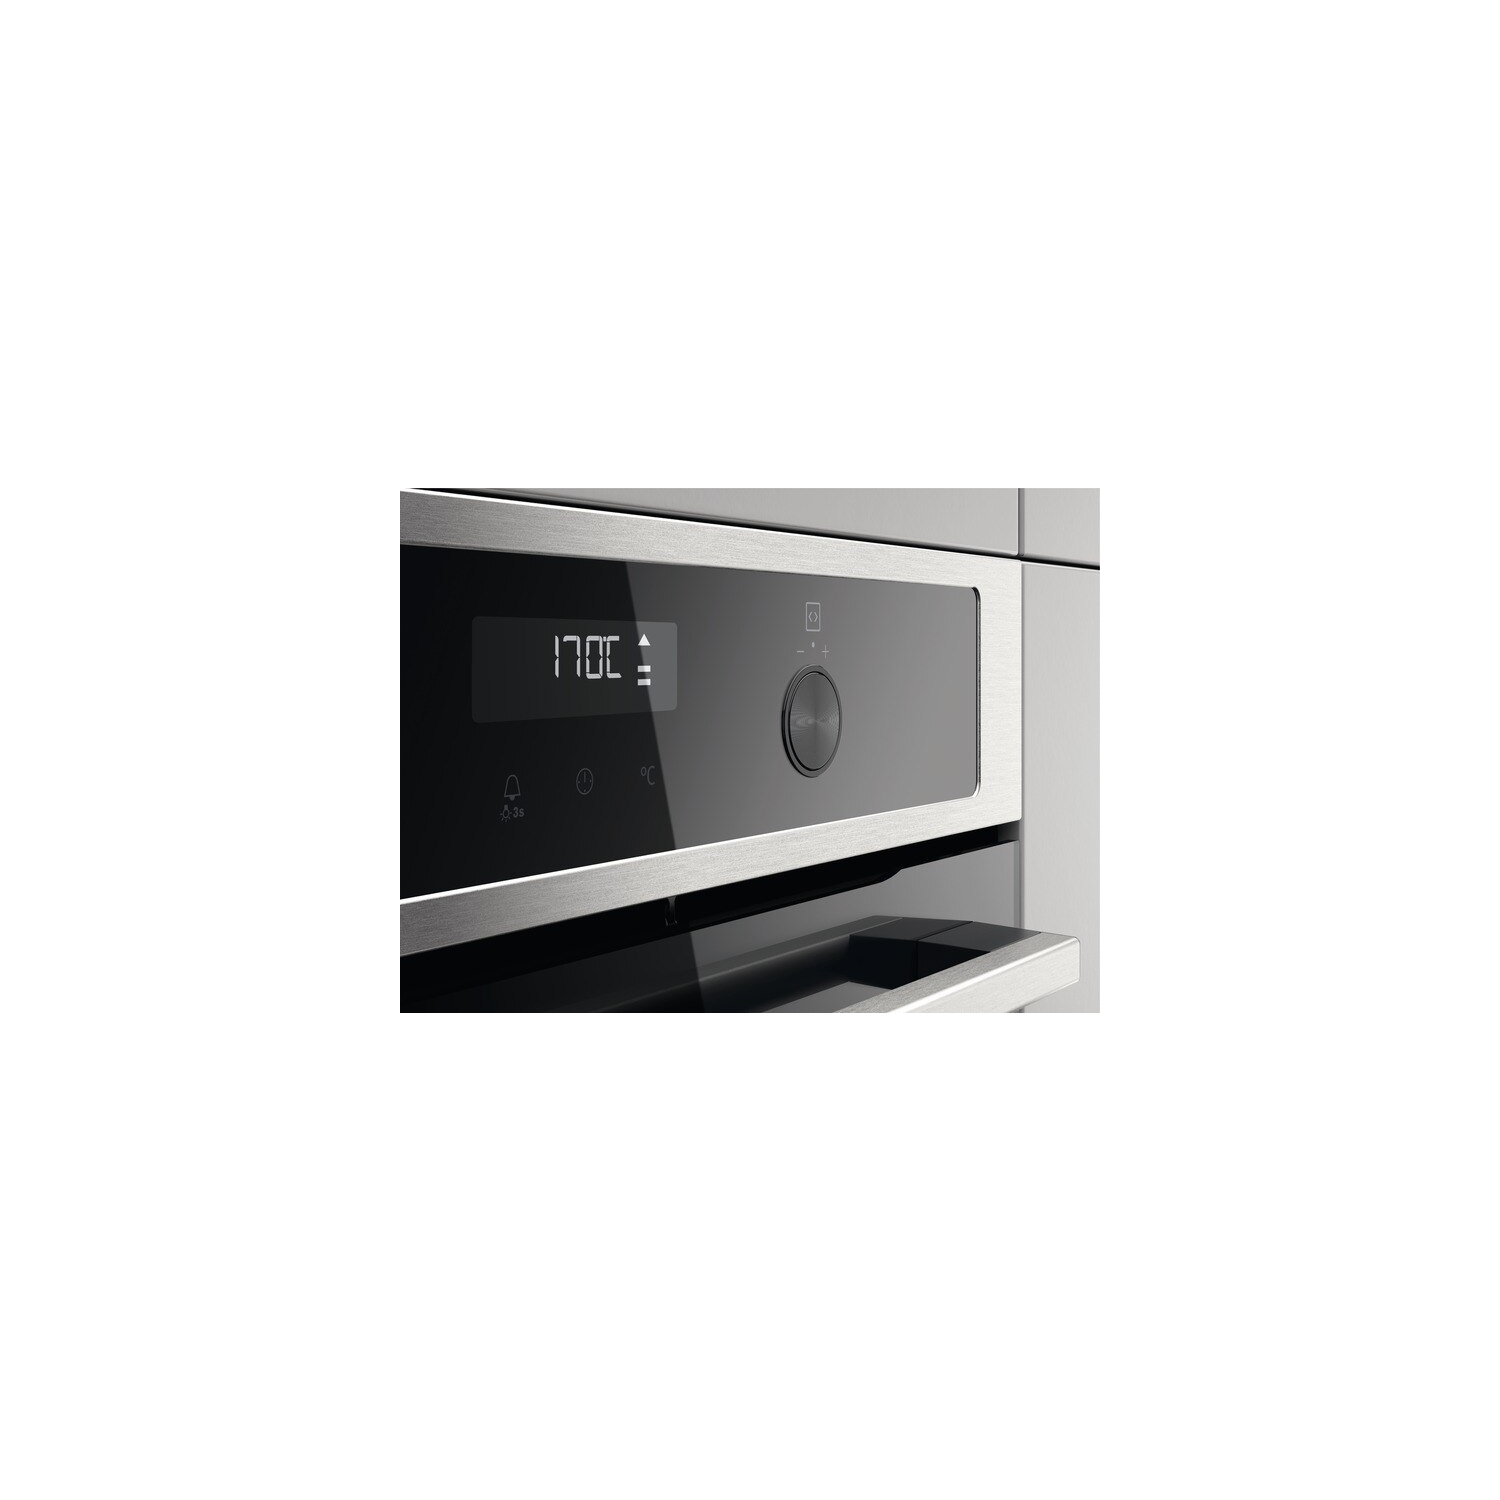 Zanussi 60cm Electric Oven - Stainless Steel - A+ Rated - 2